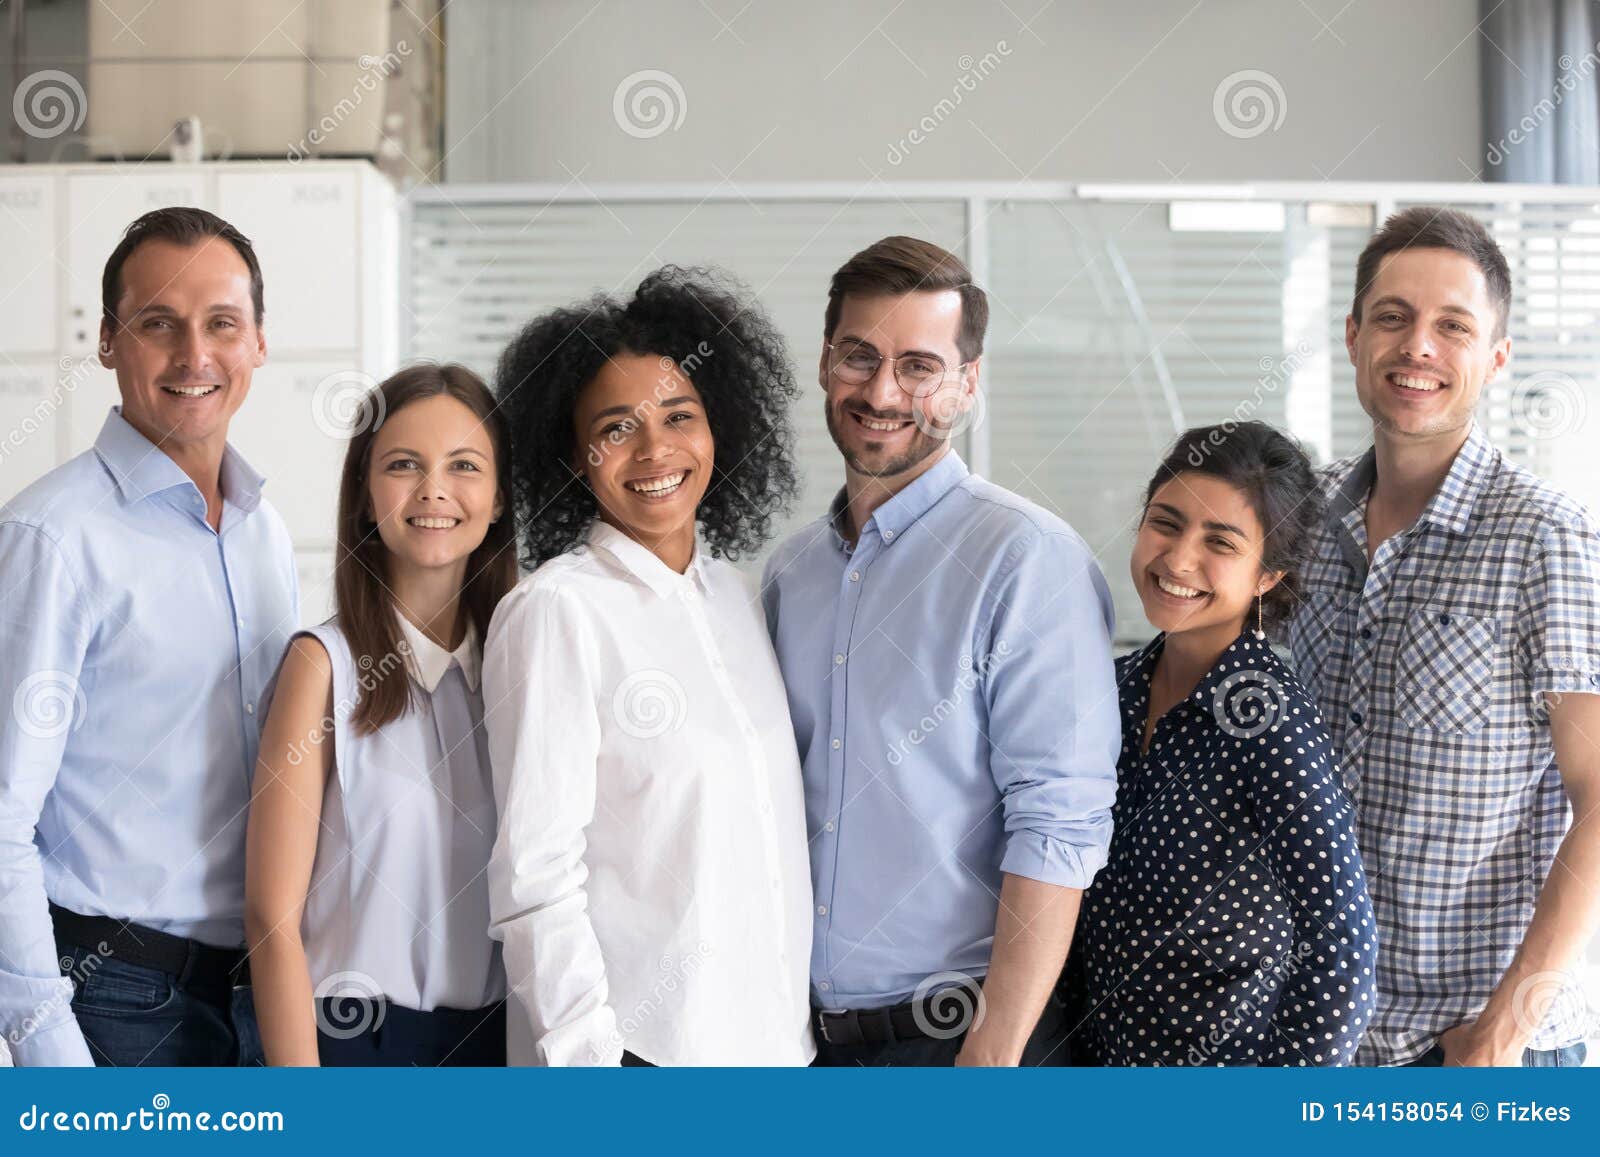 smiling diverse office workers group, multiracial employees